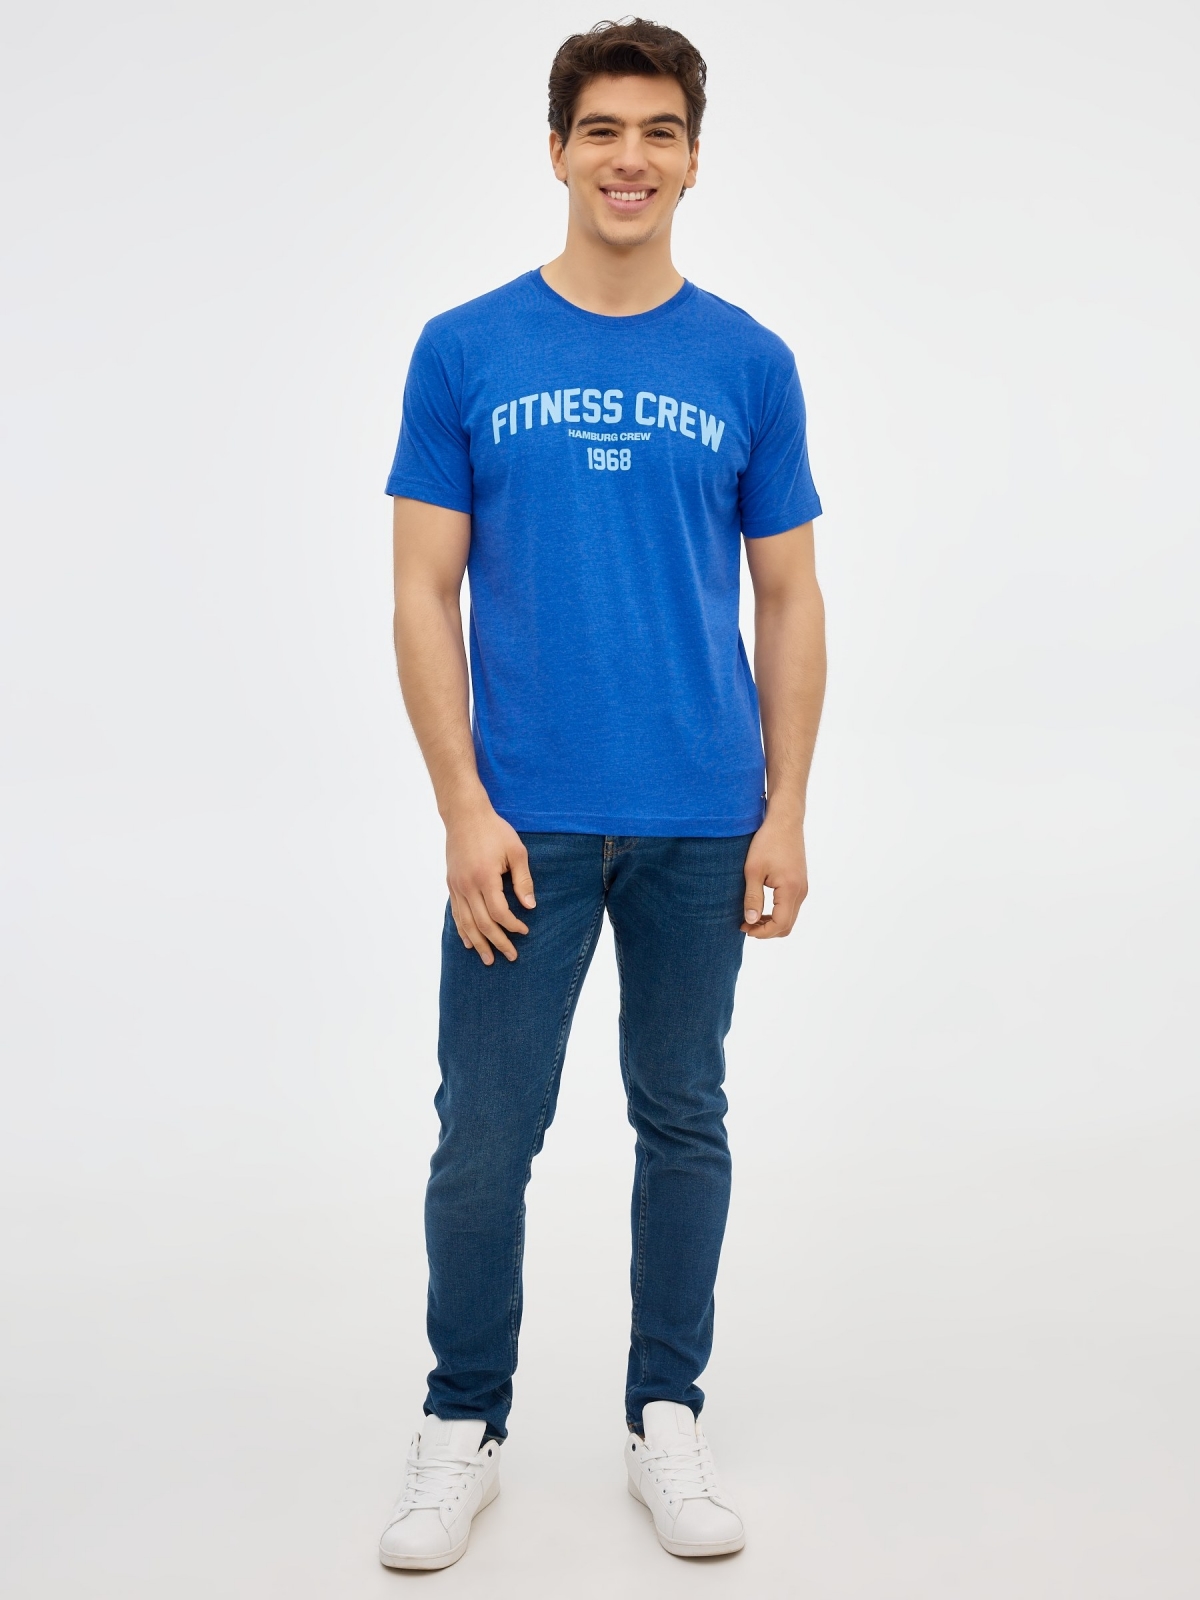 Fitness Crew T-Shirt electric blue front view